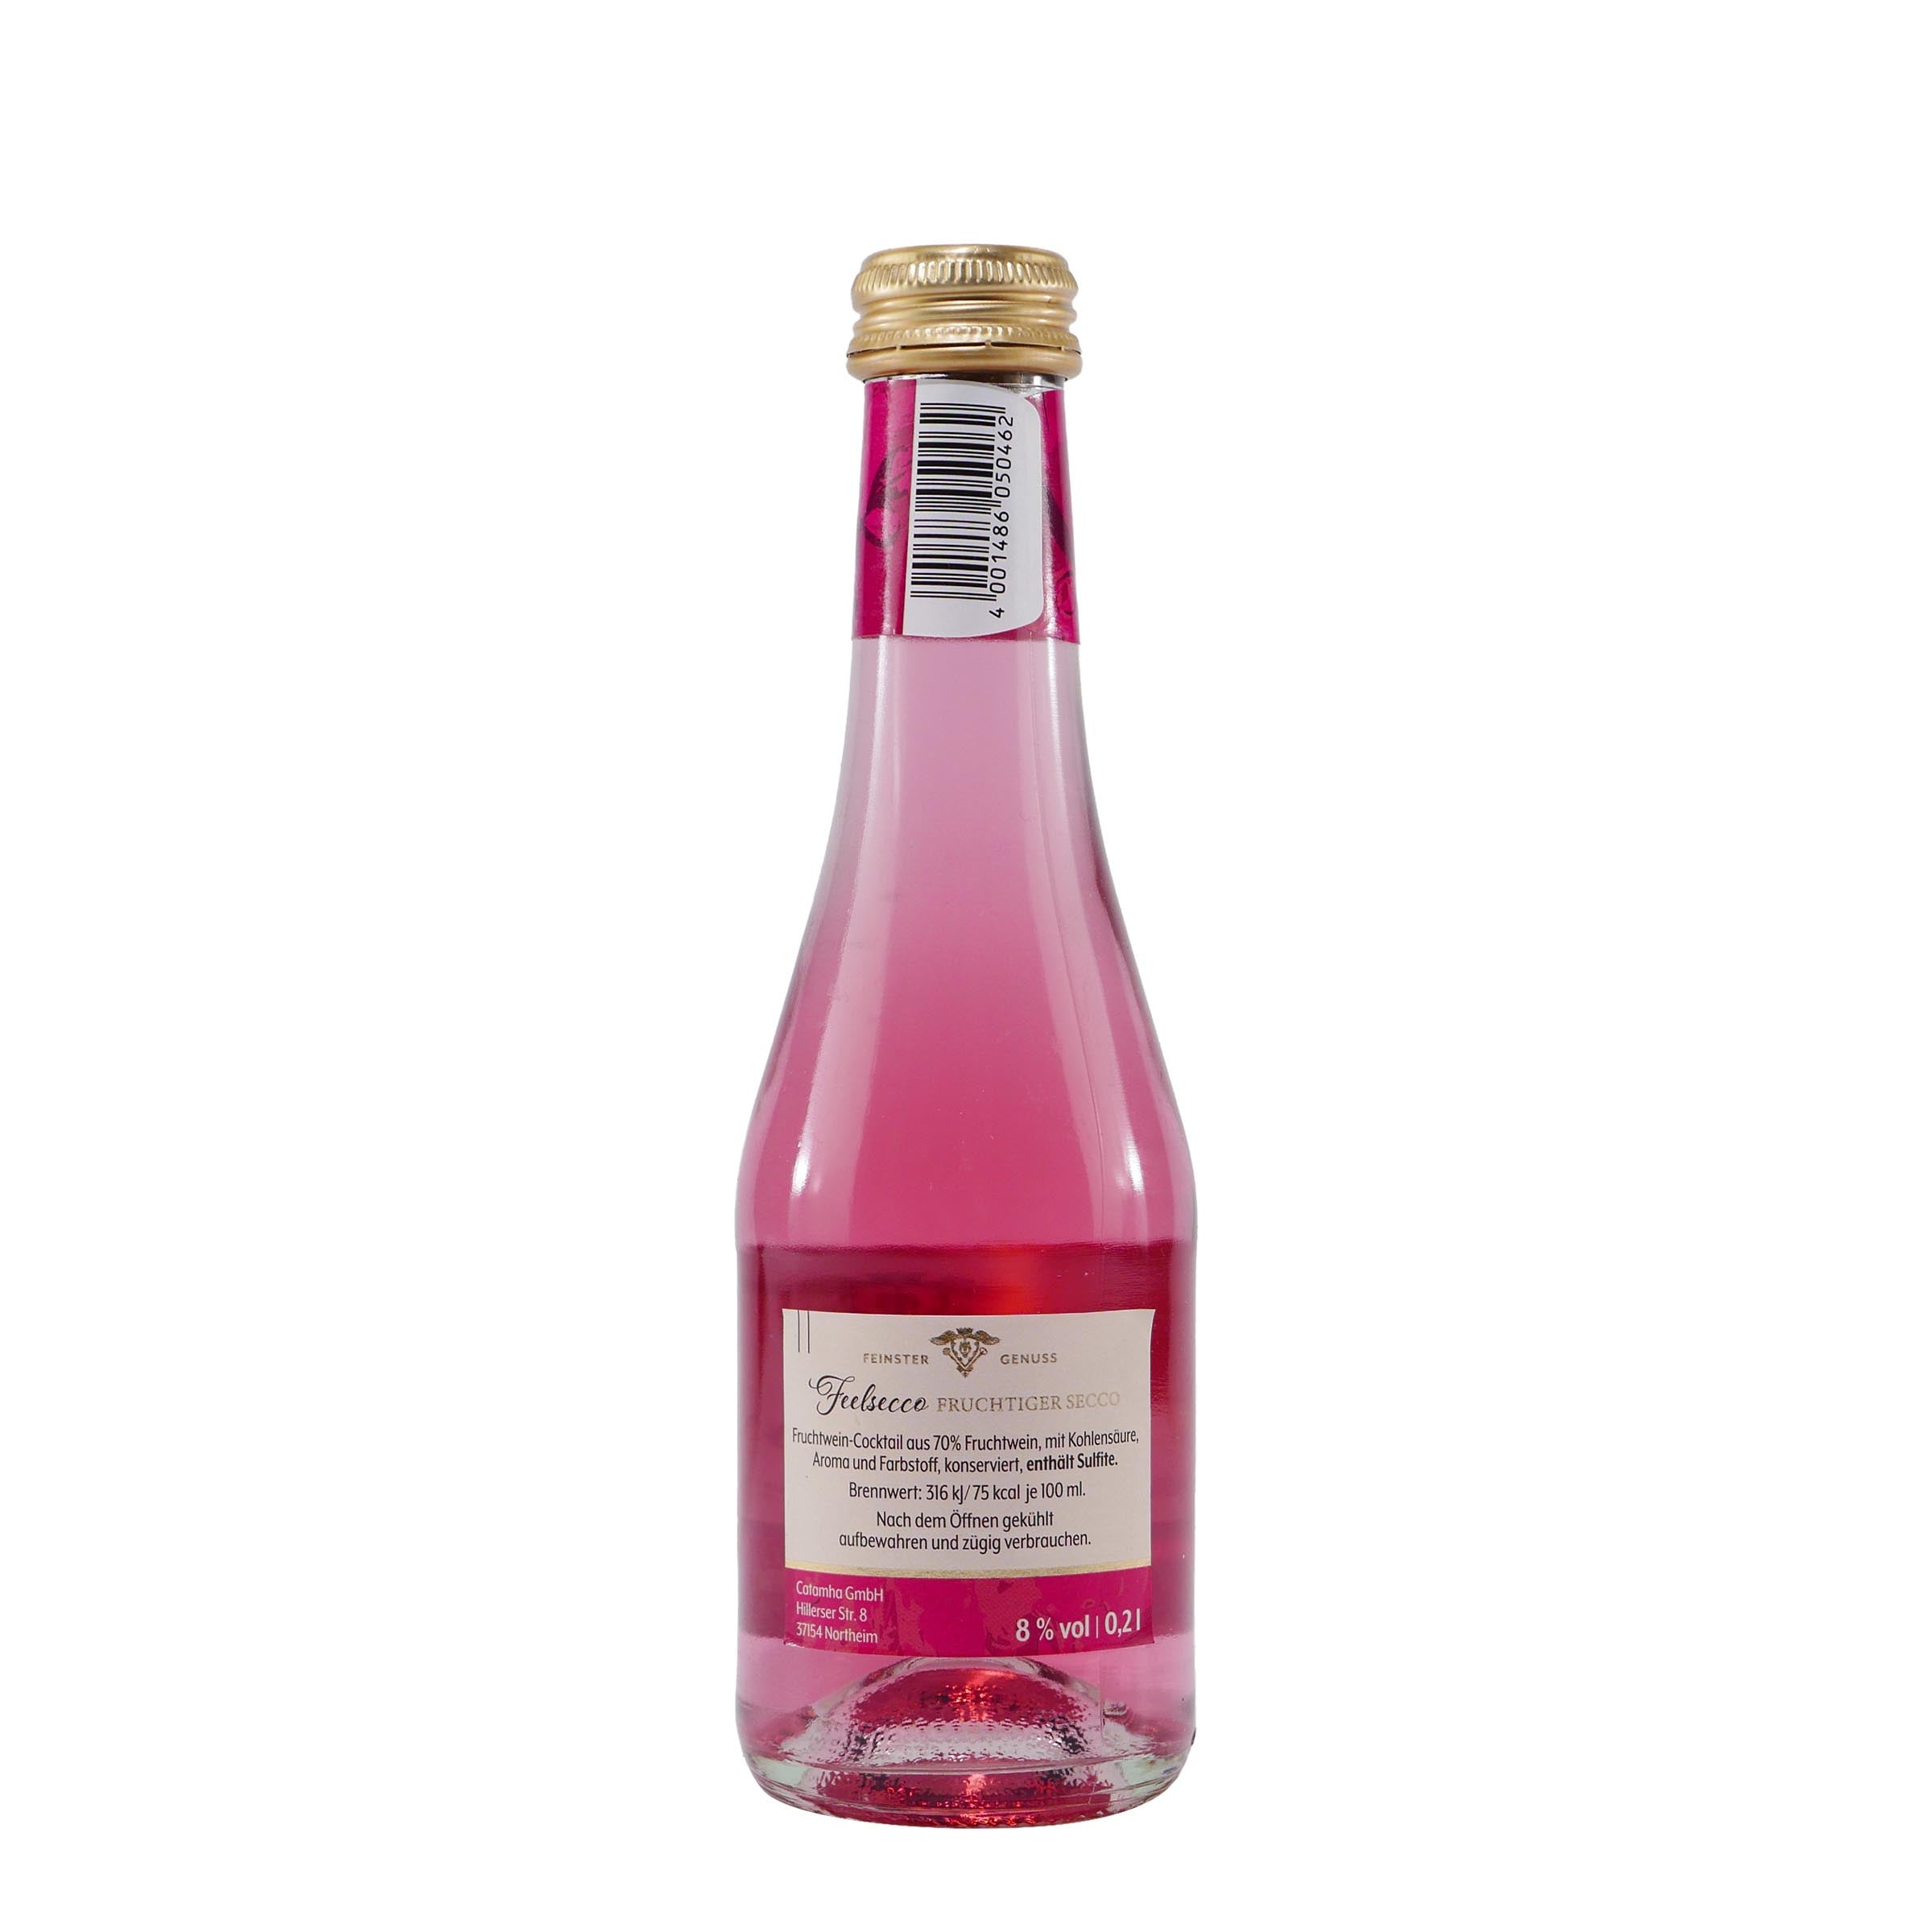 Feelsecco Himbeere (12 x 0,2L)